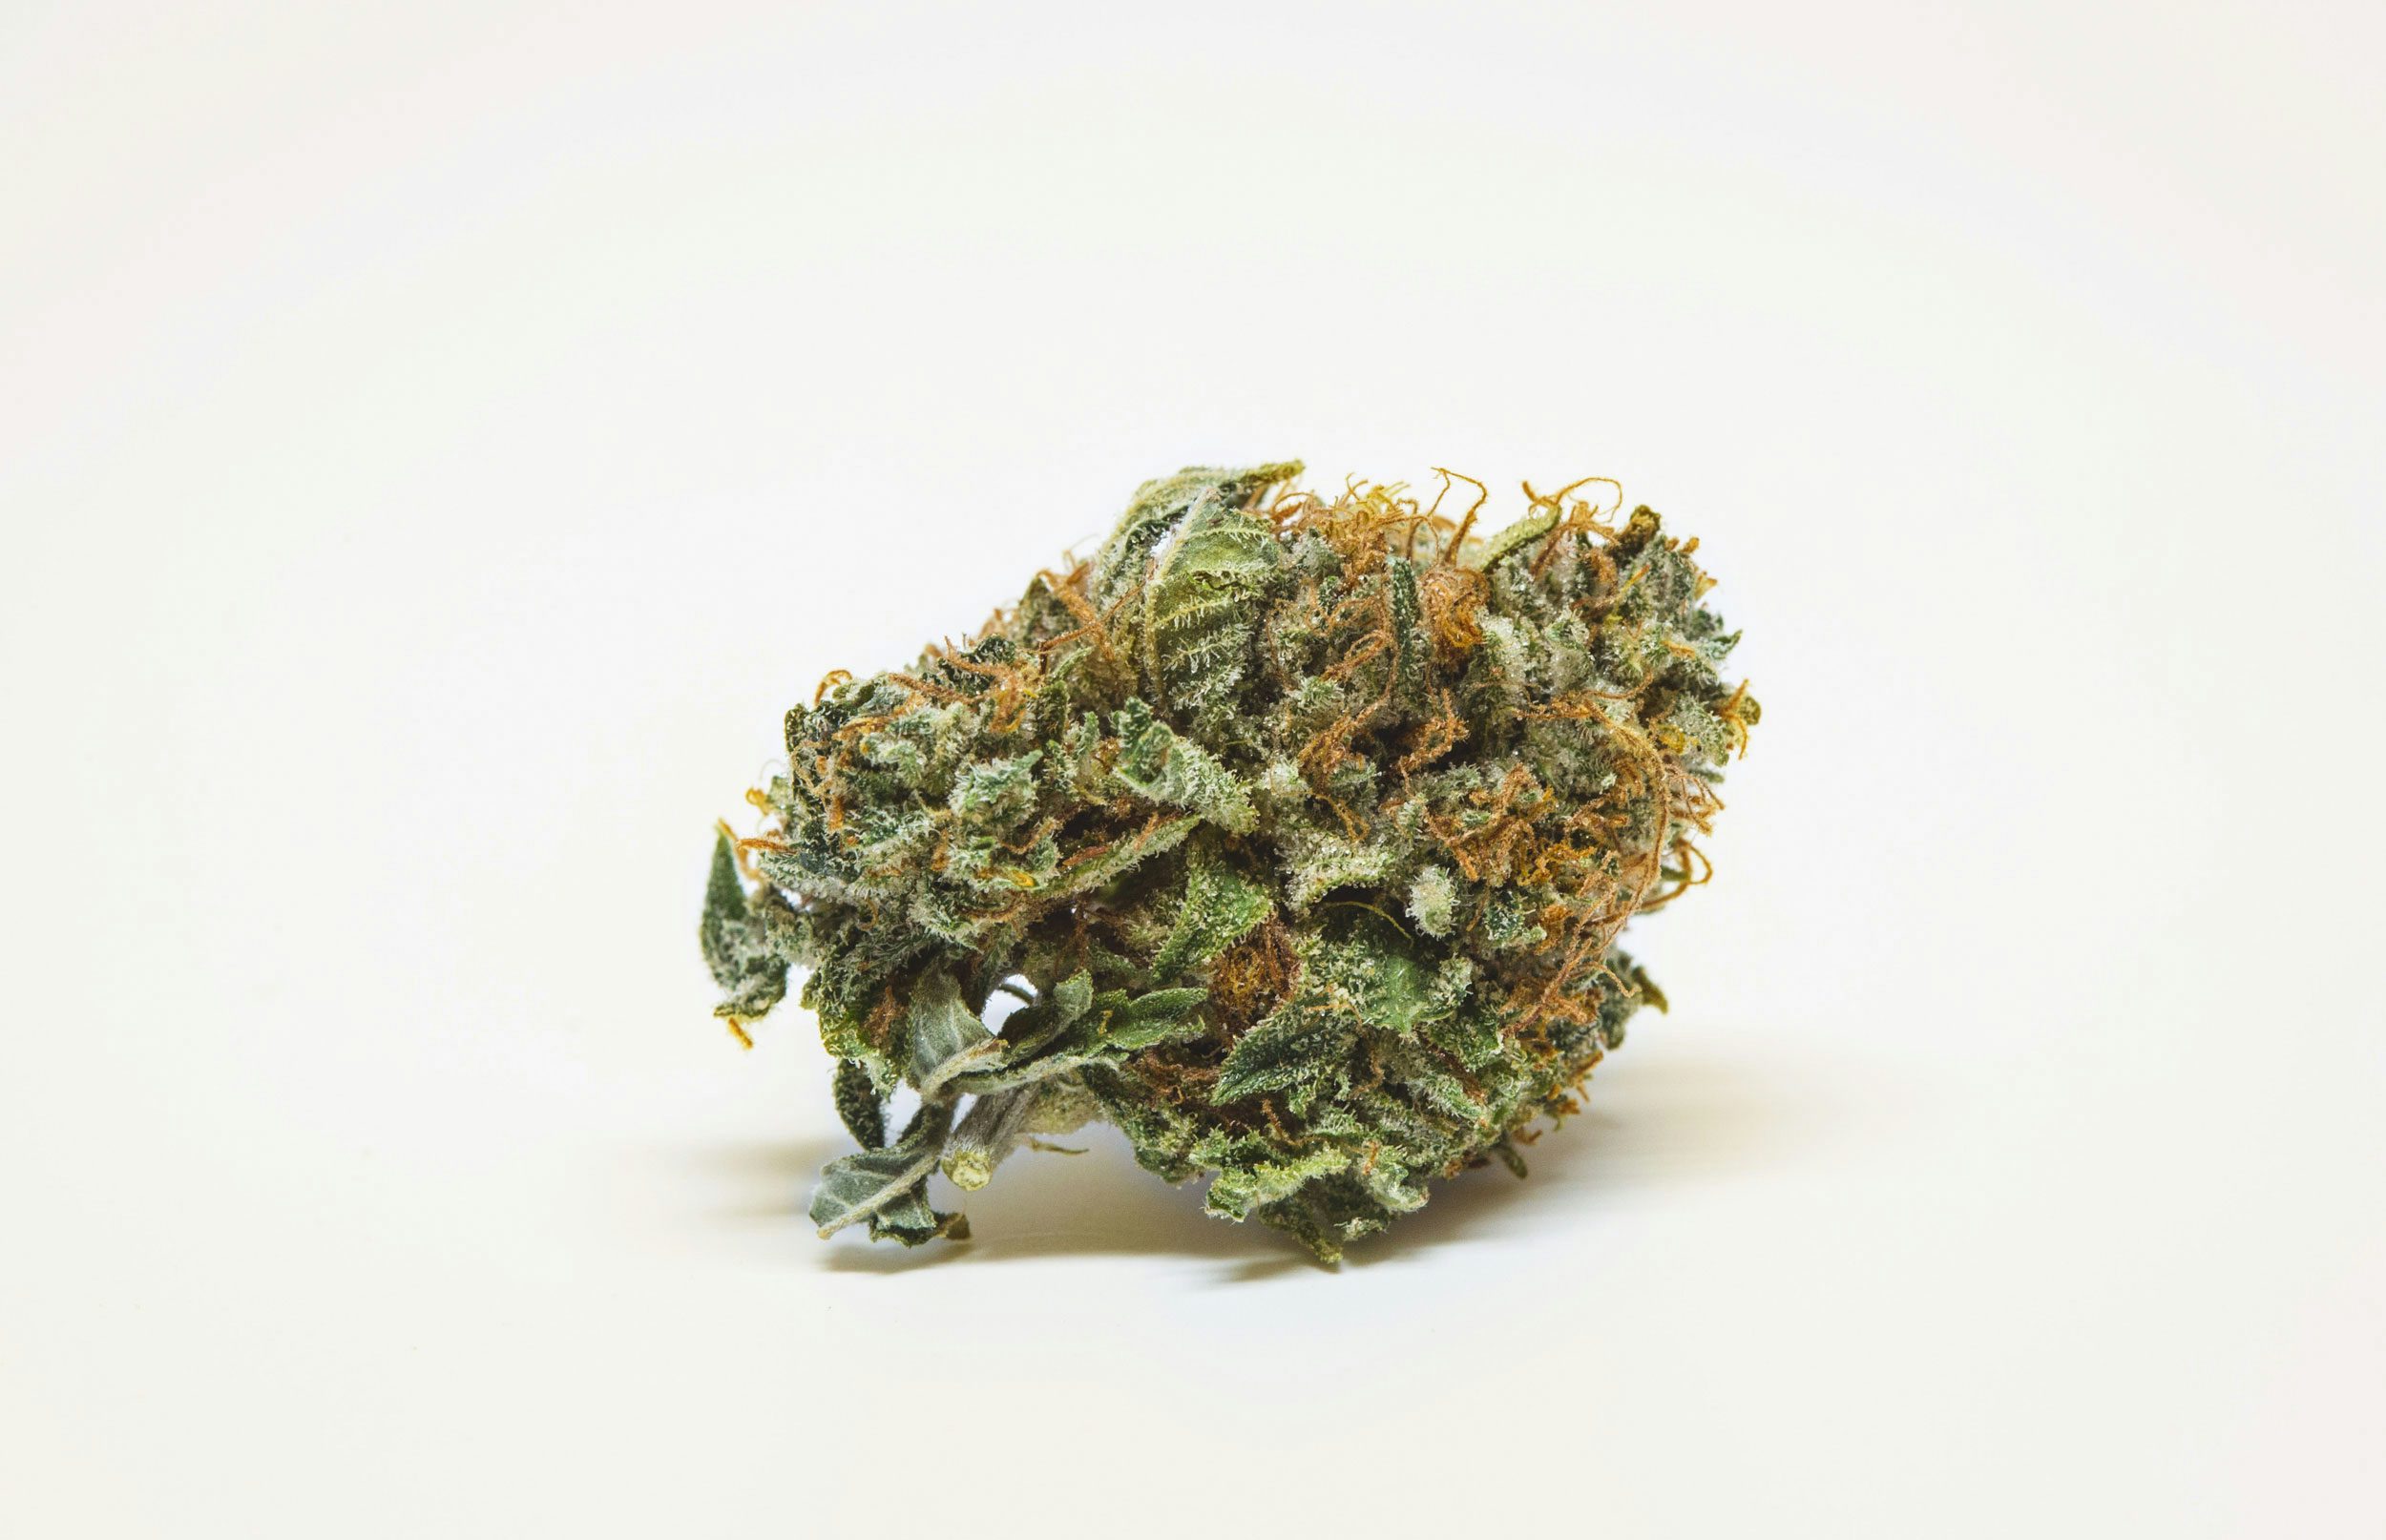 8Best Star Wars Strains To Take You To A Galaxy Far Far Away Best Star Wars Strains To Take You To A Galaxy Far, Far Away